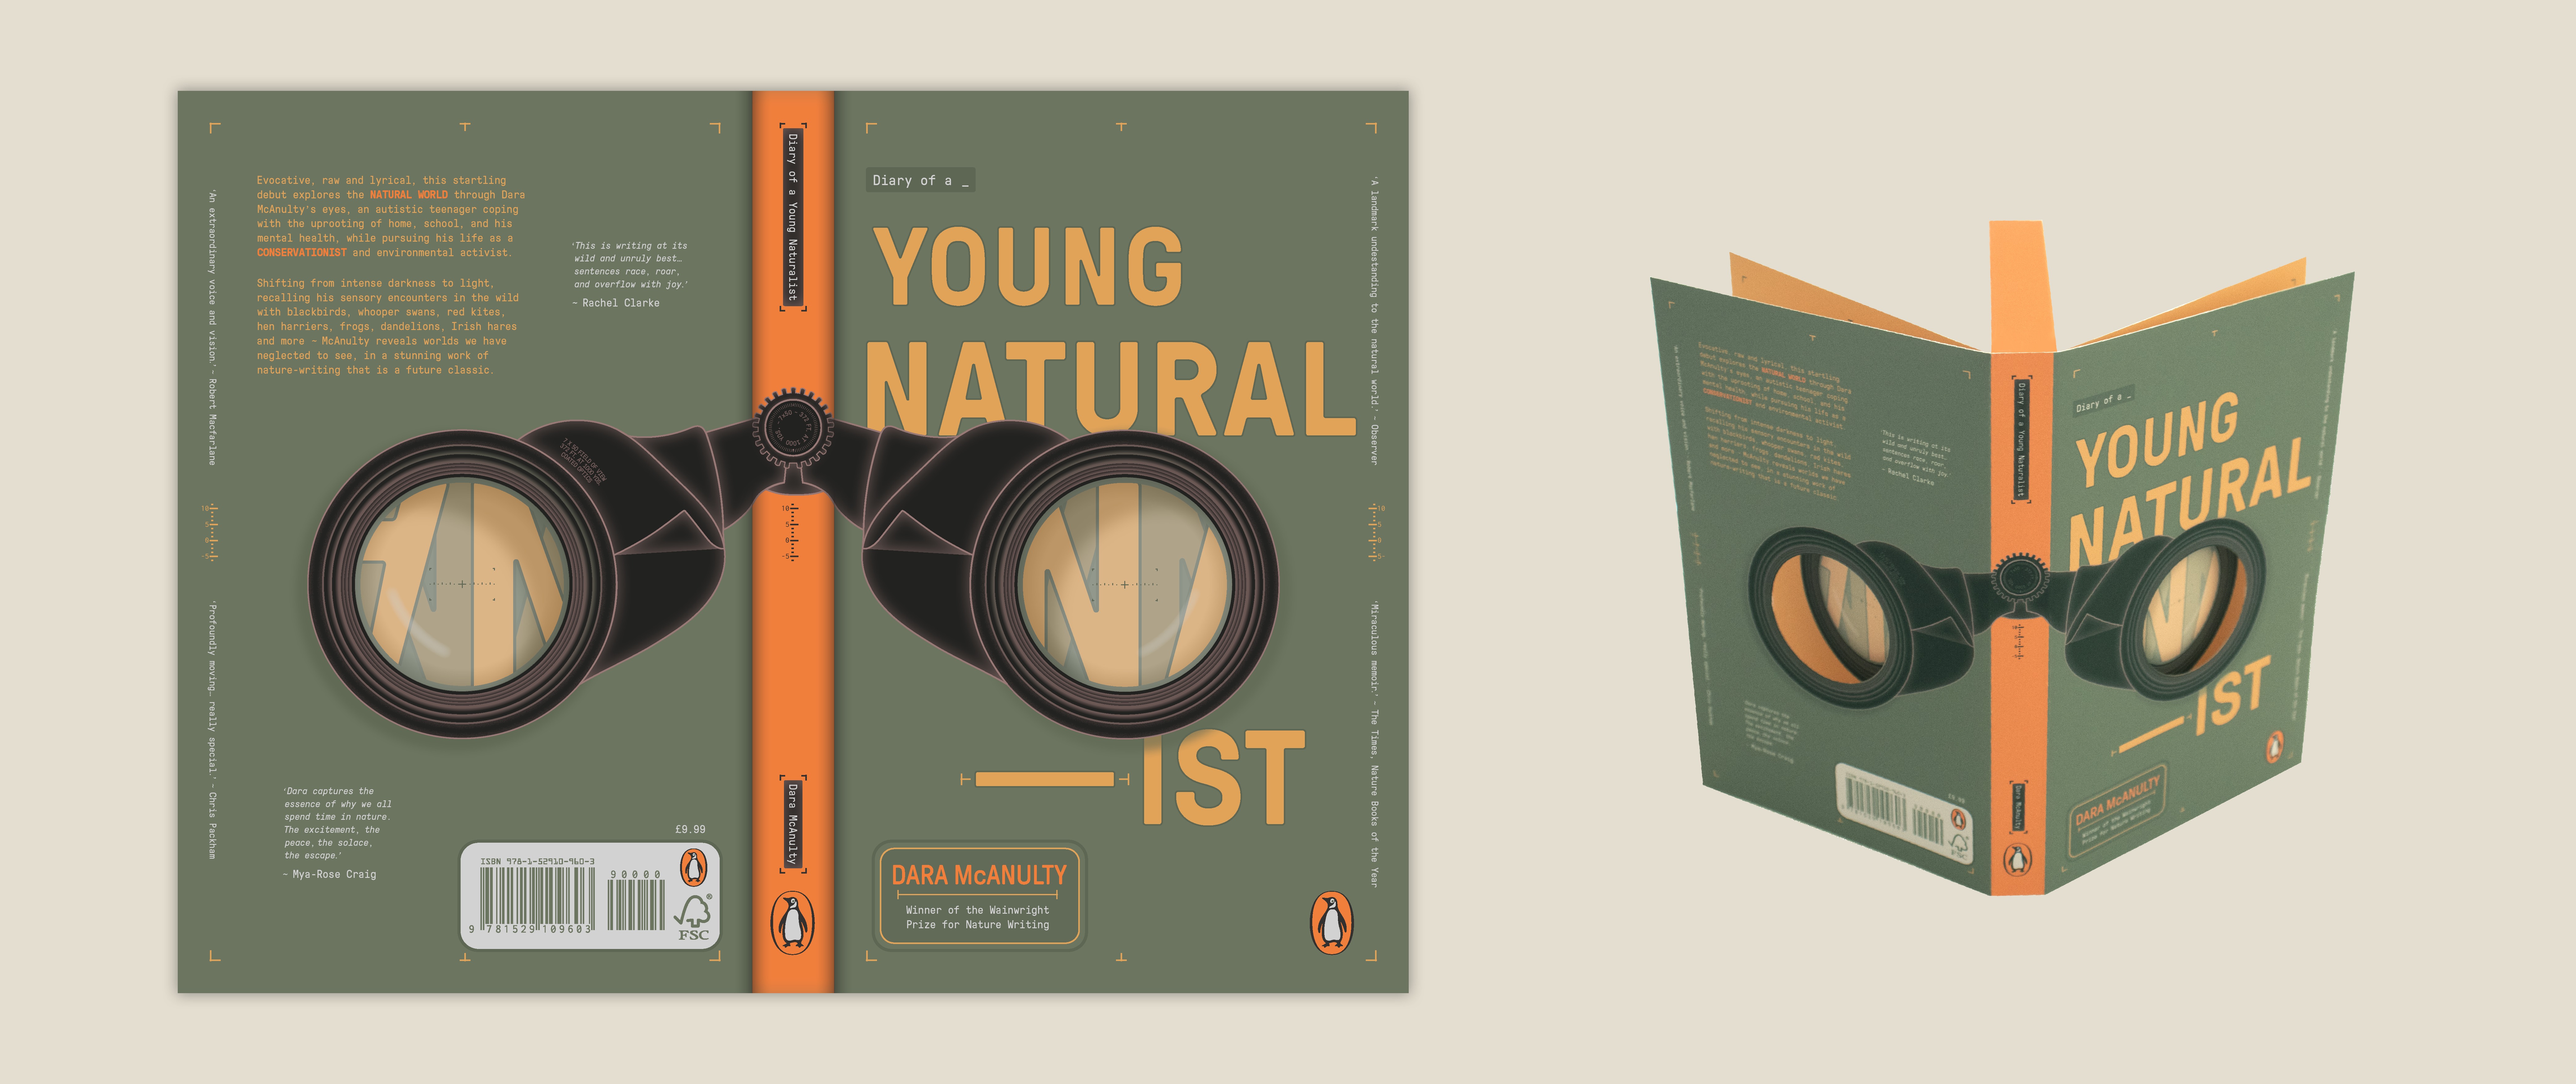 BA Design for Publishing work by Rebecca Hills shows the book concept's front, back, and spine featuring bold type and layered binocular drawings.